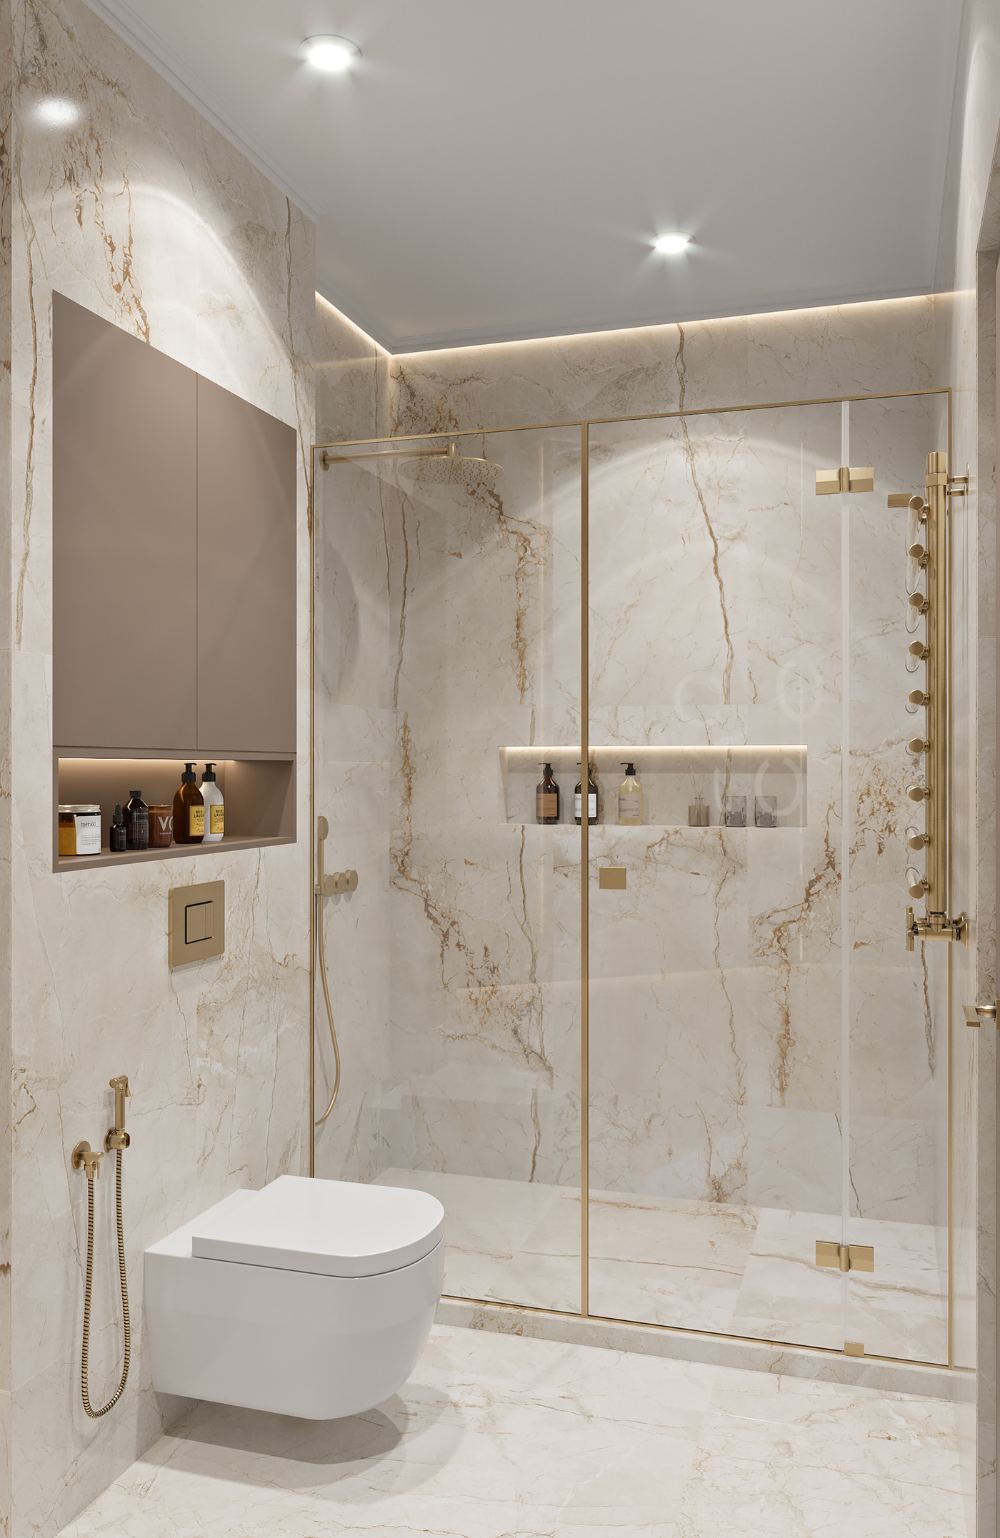 Bathroom Lighting: Which One Is Better?